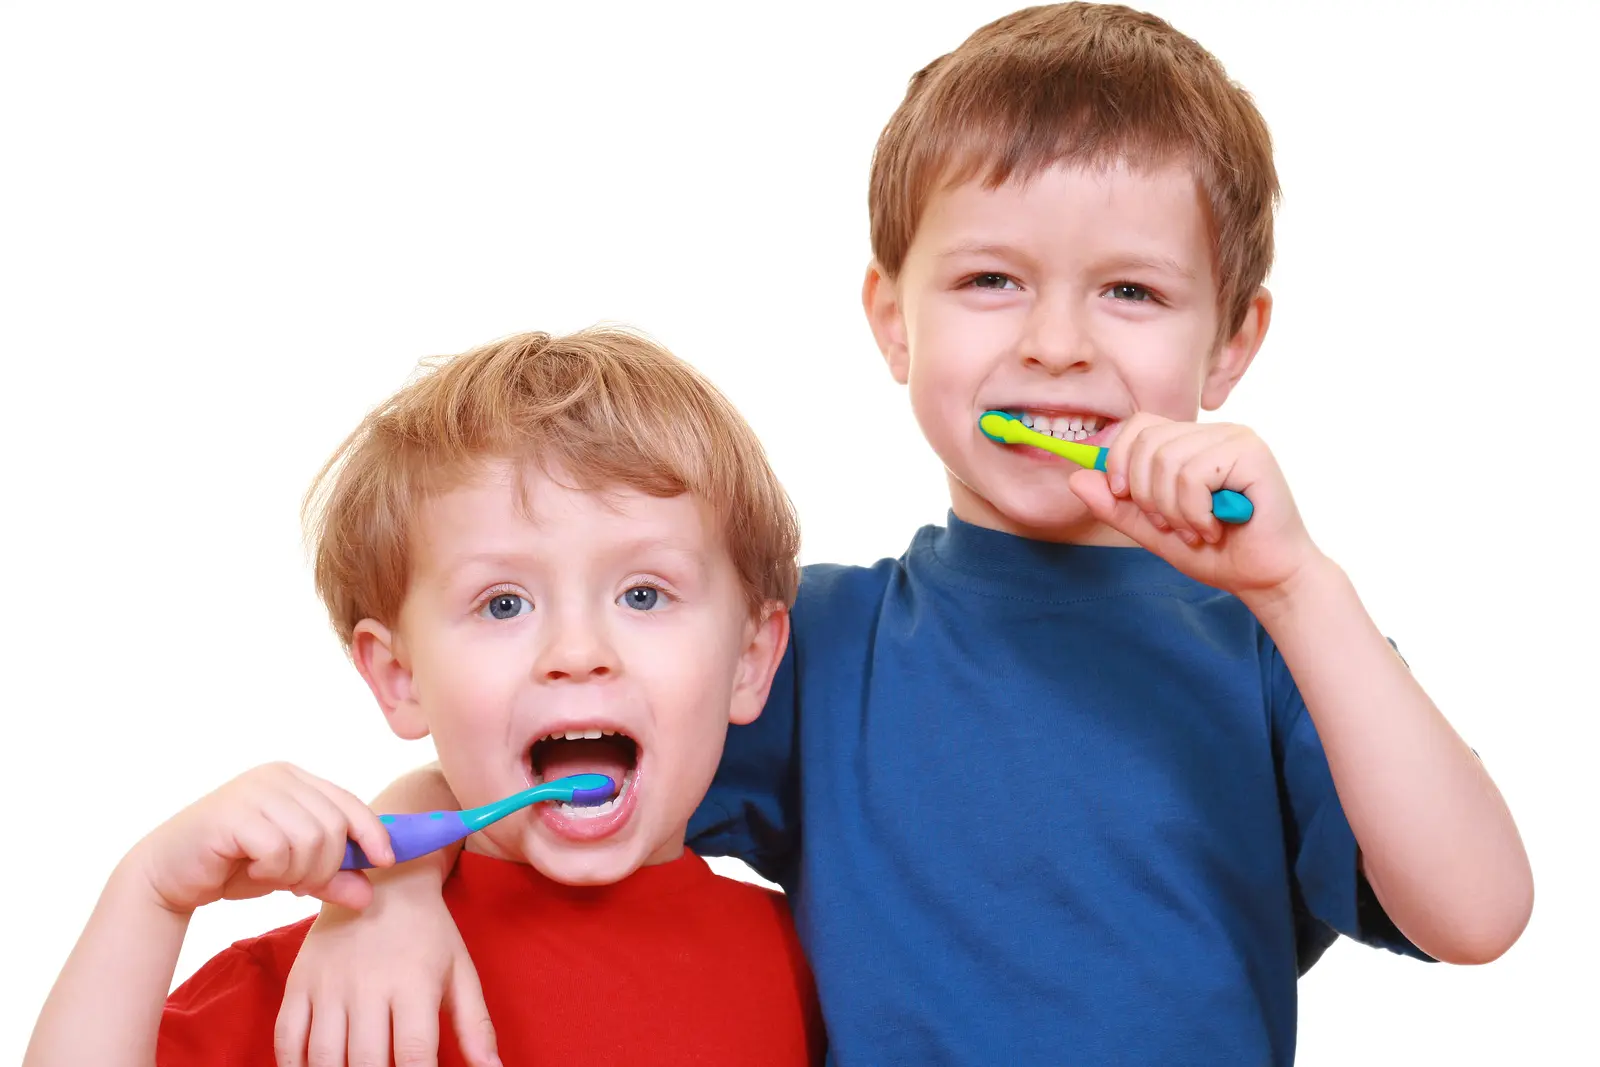 Parenting 101: Teaching Your Children To Brush Their Teeth